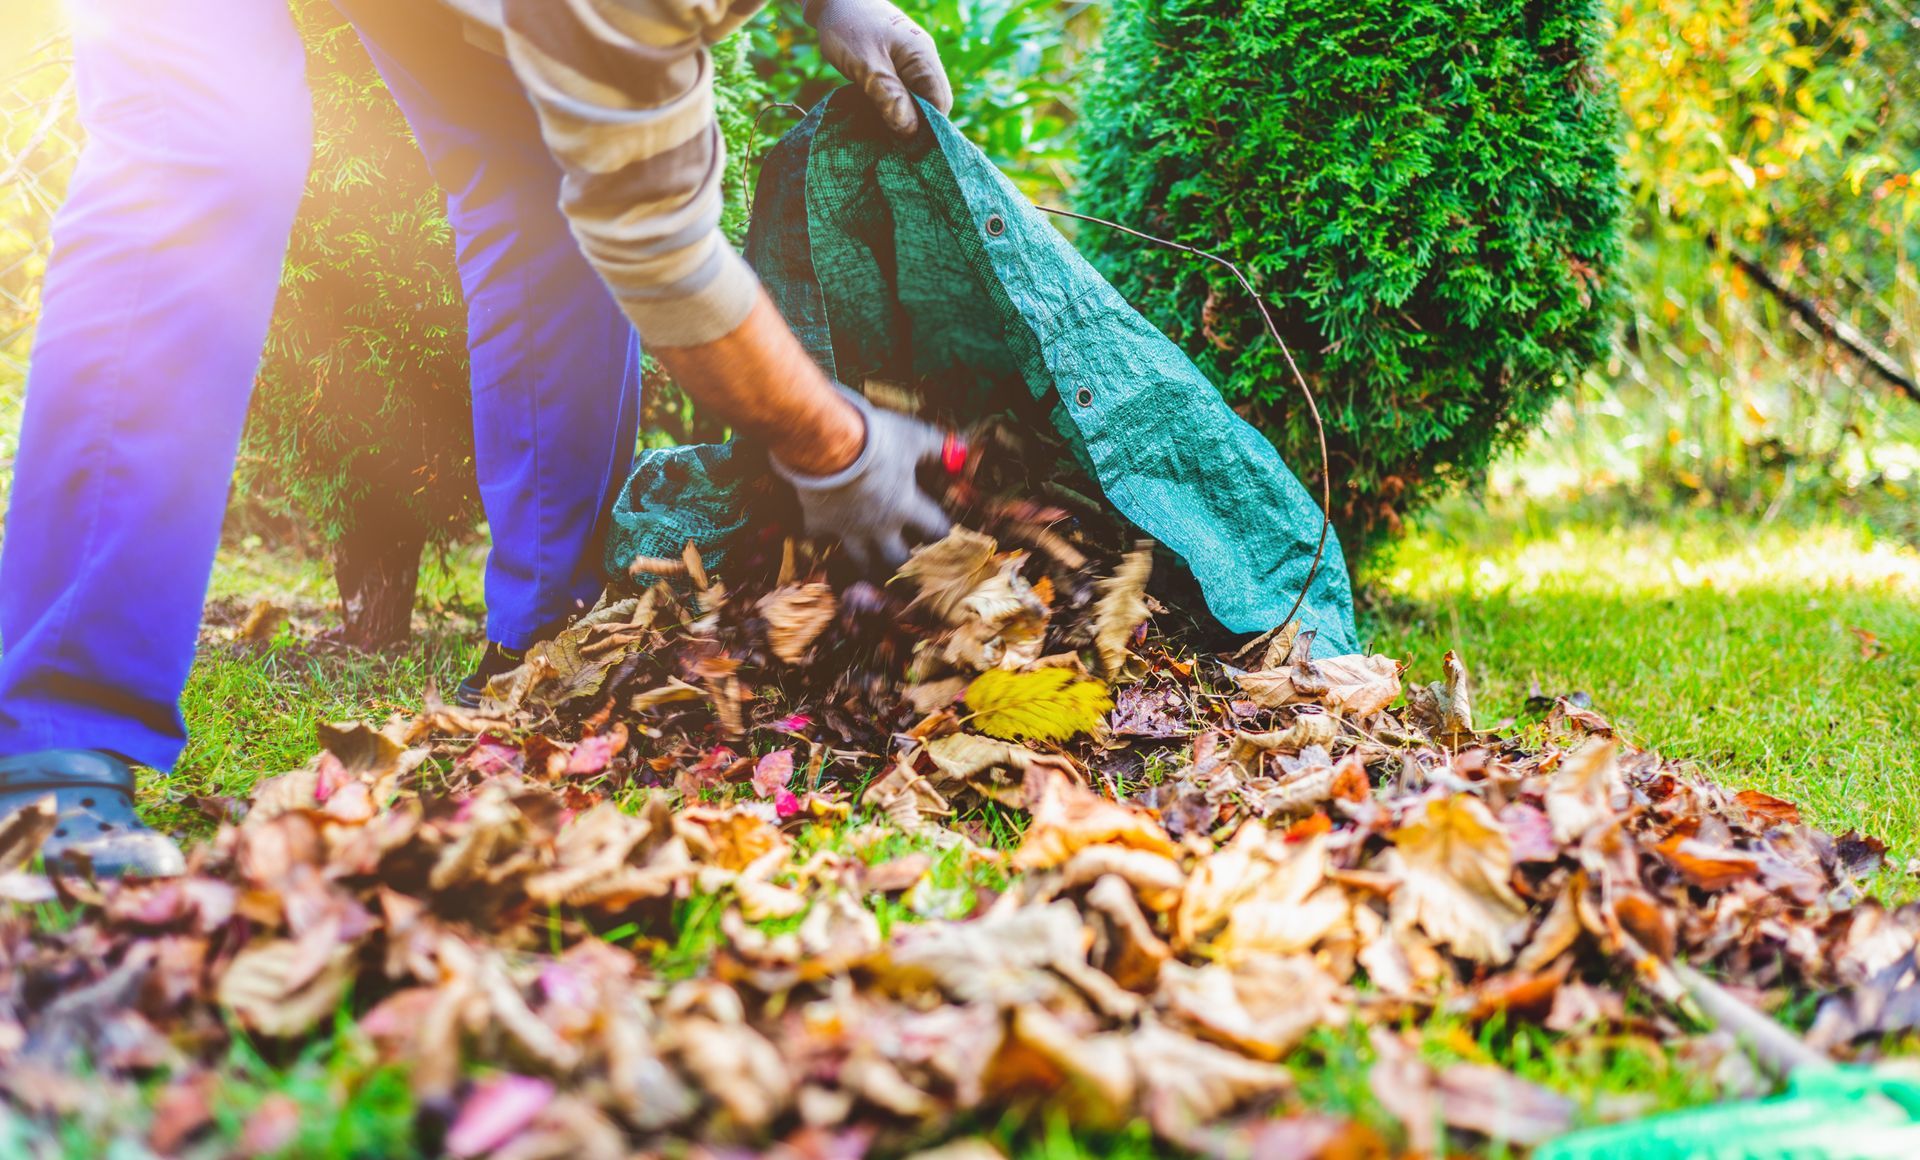 A man is raking leaves in a garden with a green bag.